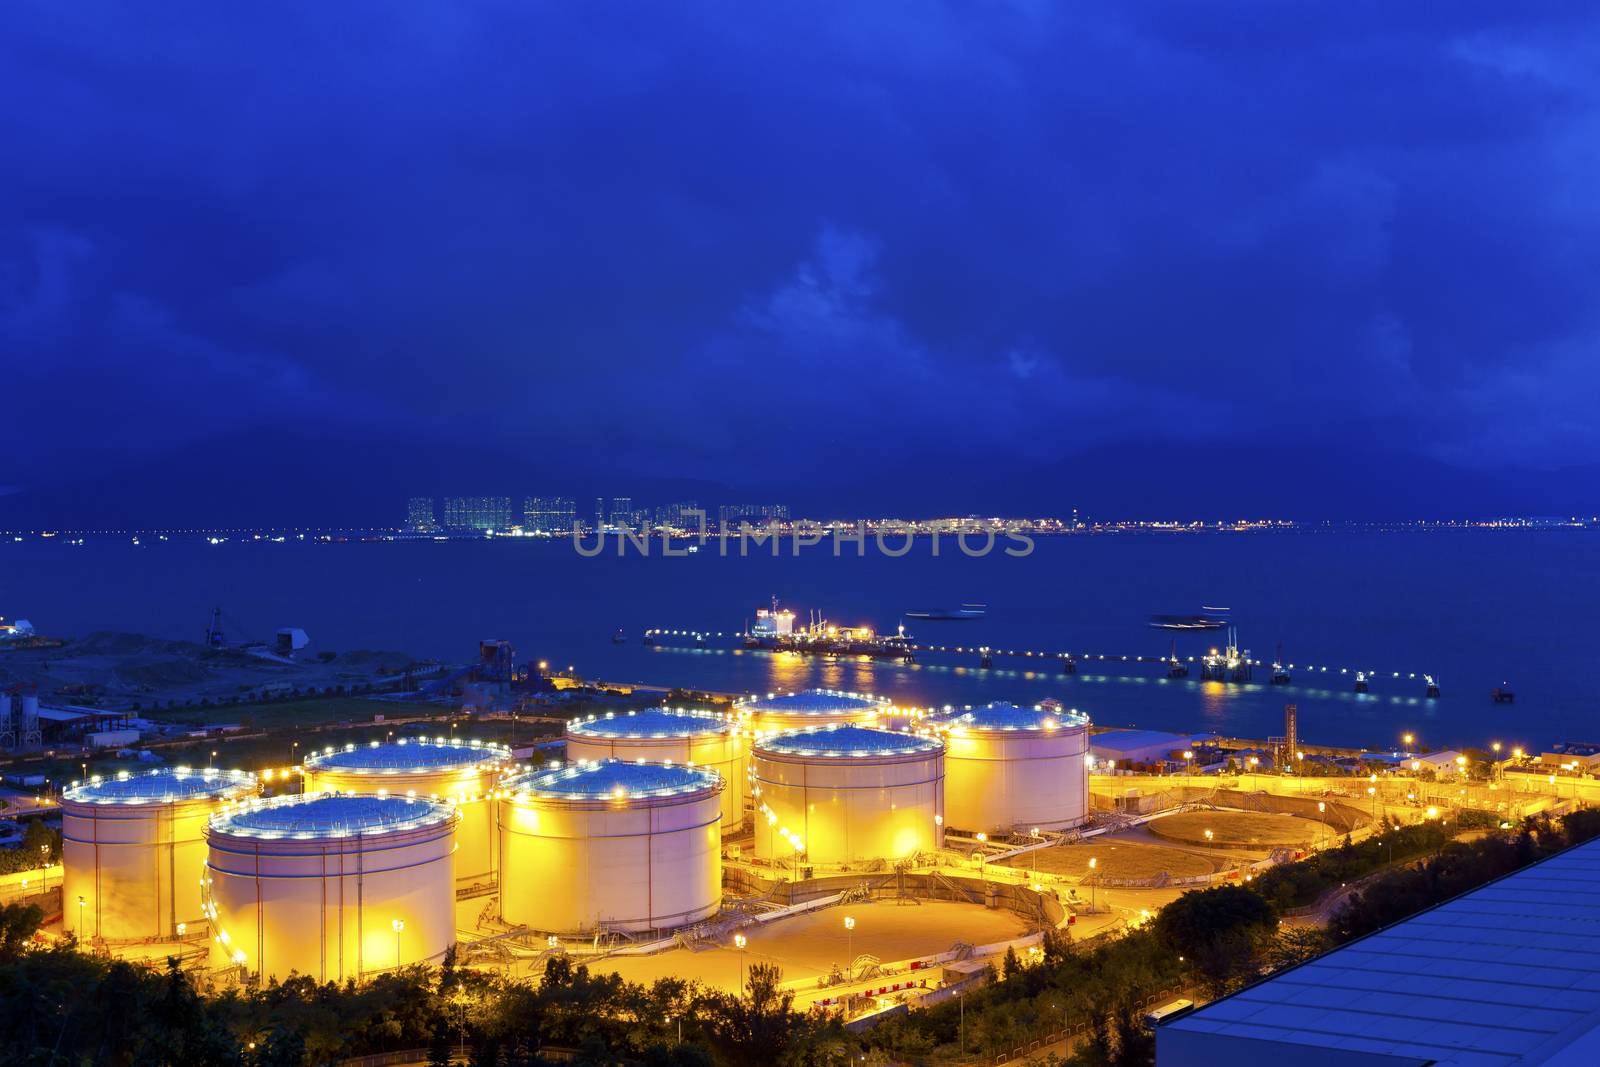 Big Industrial oil tanks in a refinery at night by kawing921